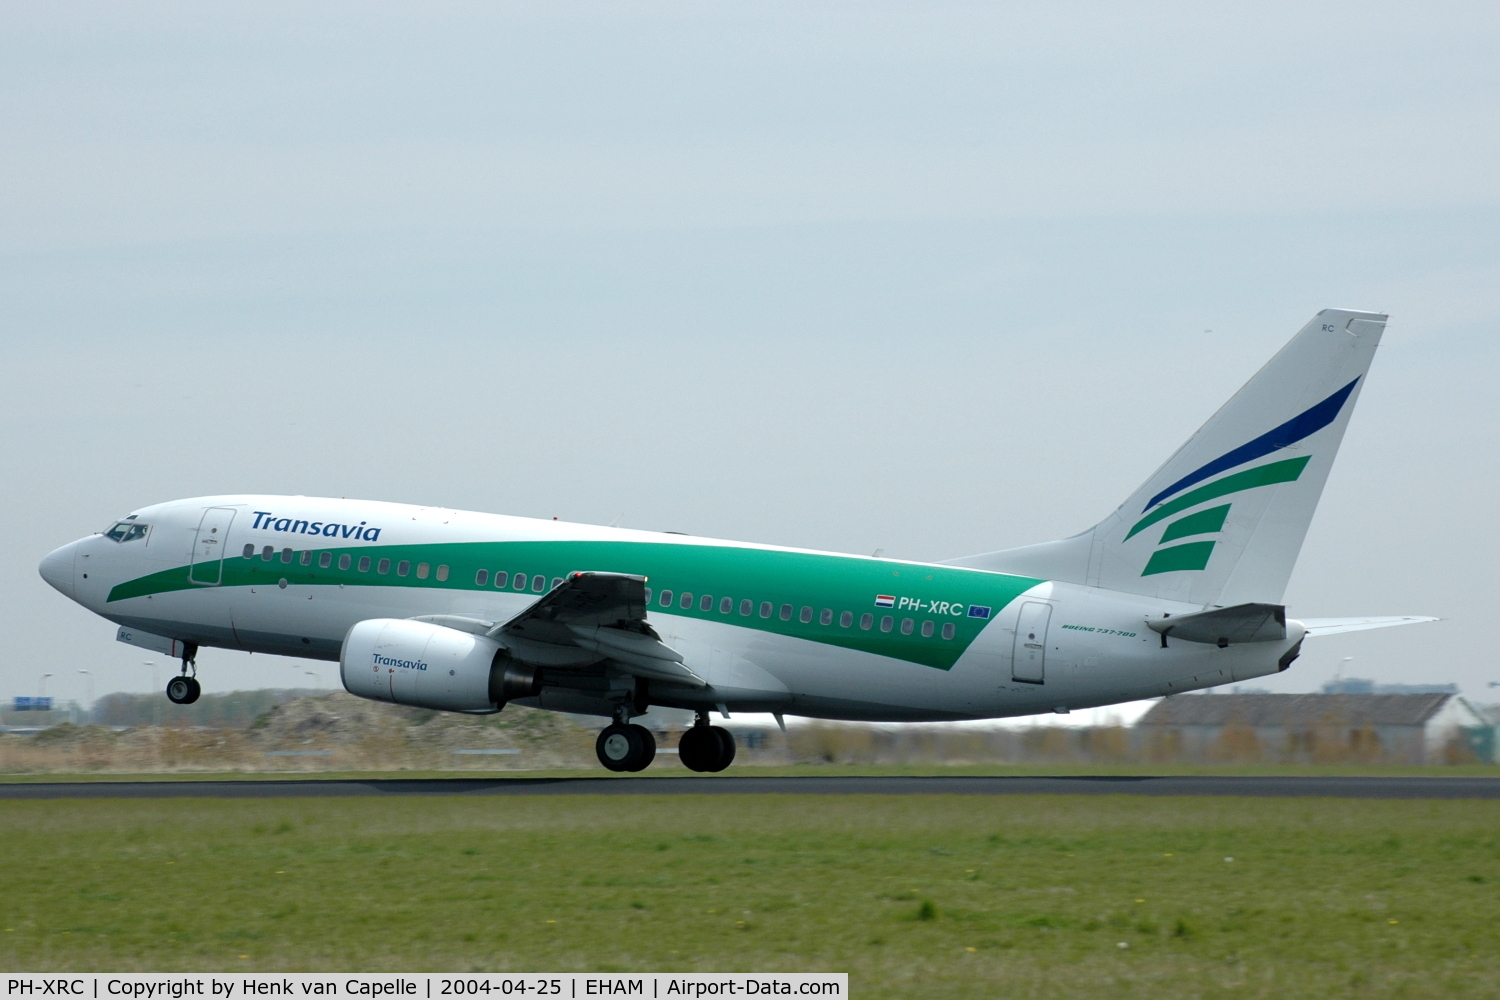 PH-XRC, 2003 Boeing 737-7K2 C/N 29347, Transavia Airlines 737-700 in a older livery taking off from Schiphol airport.